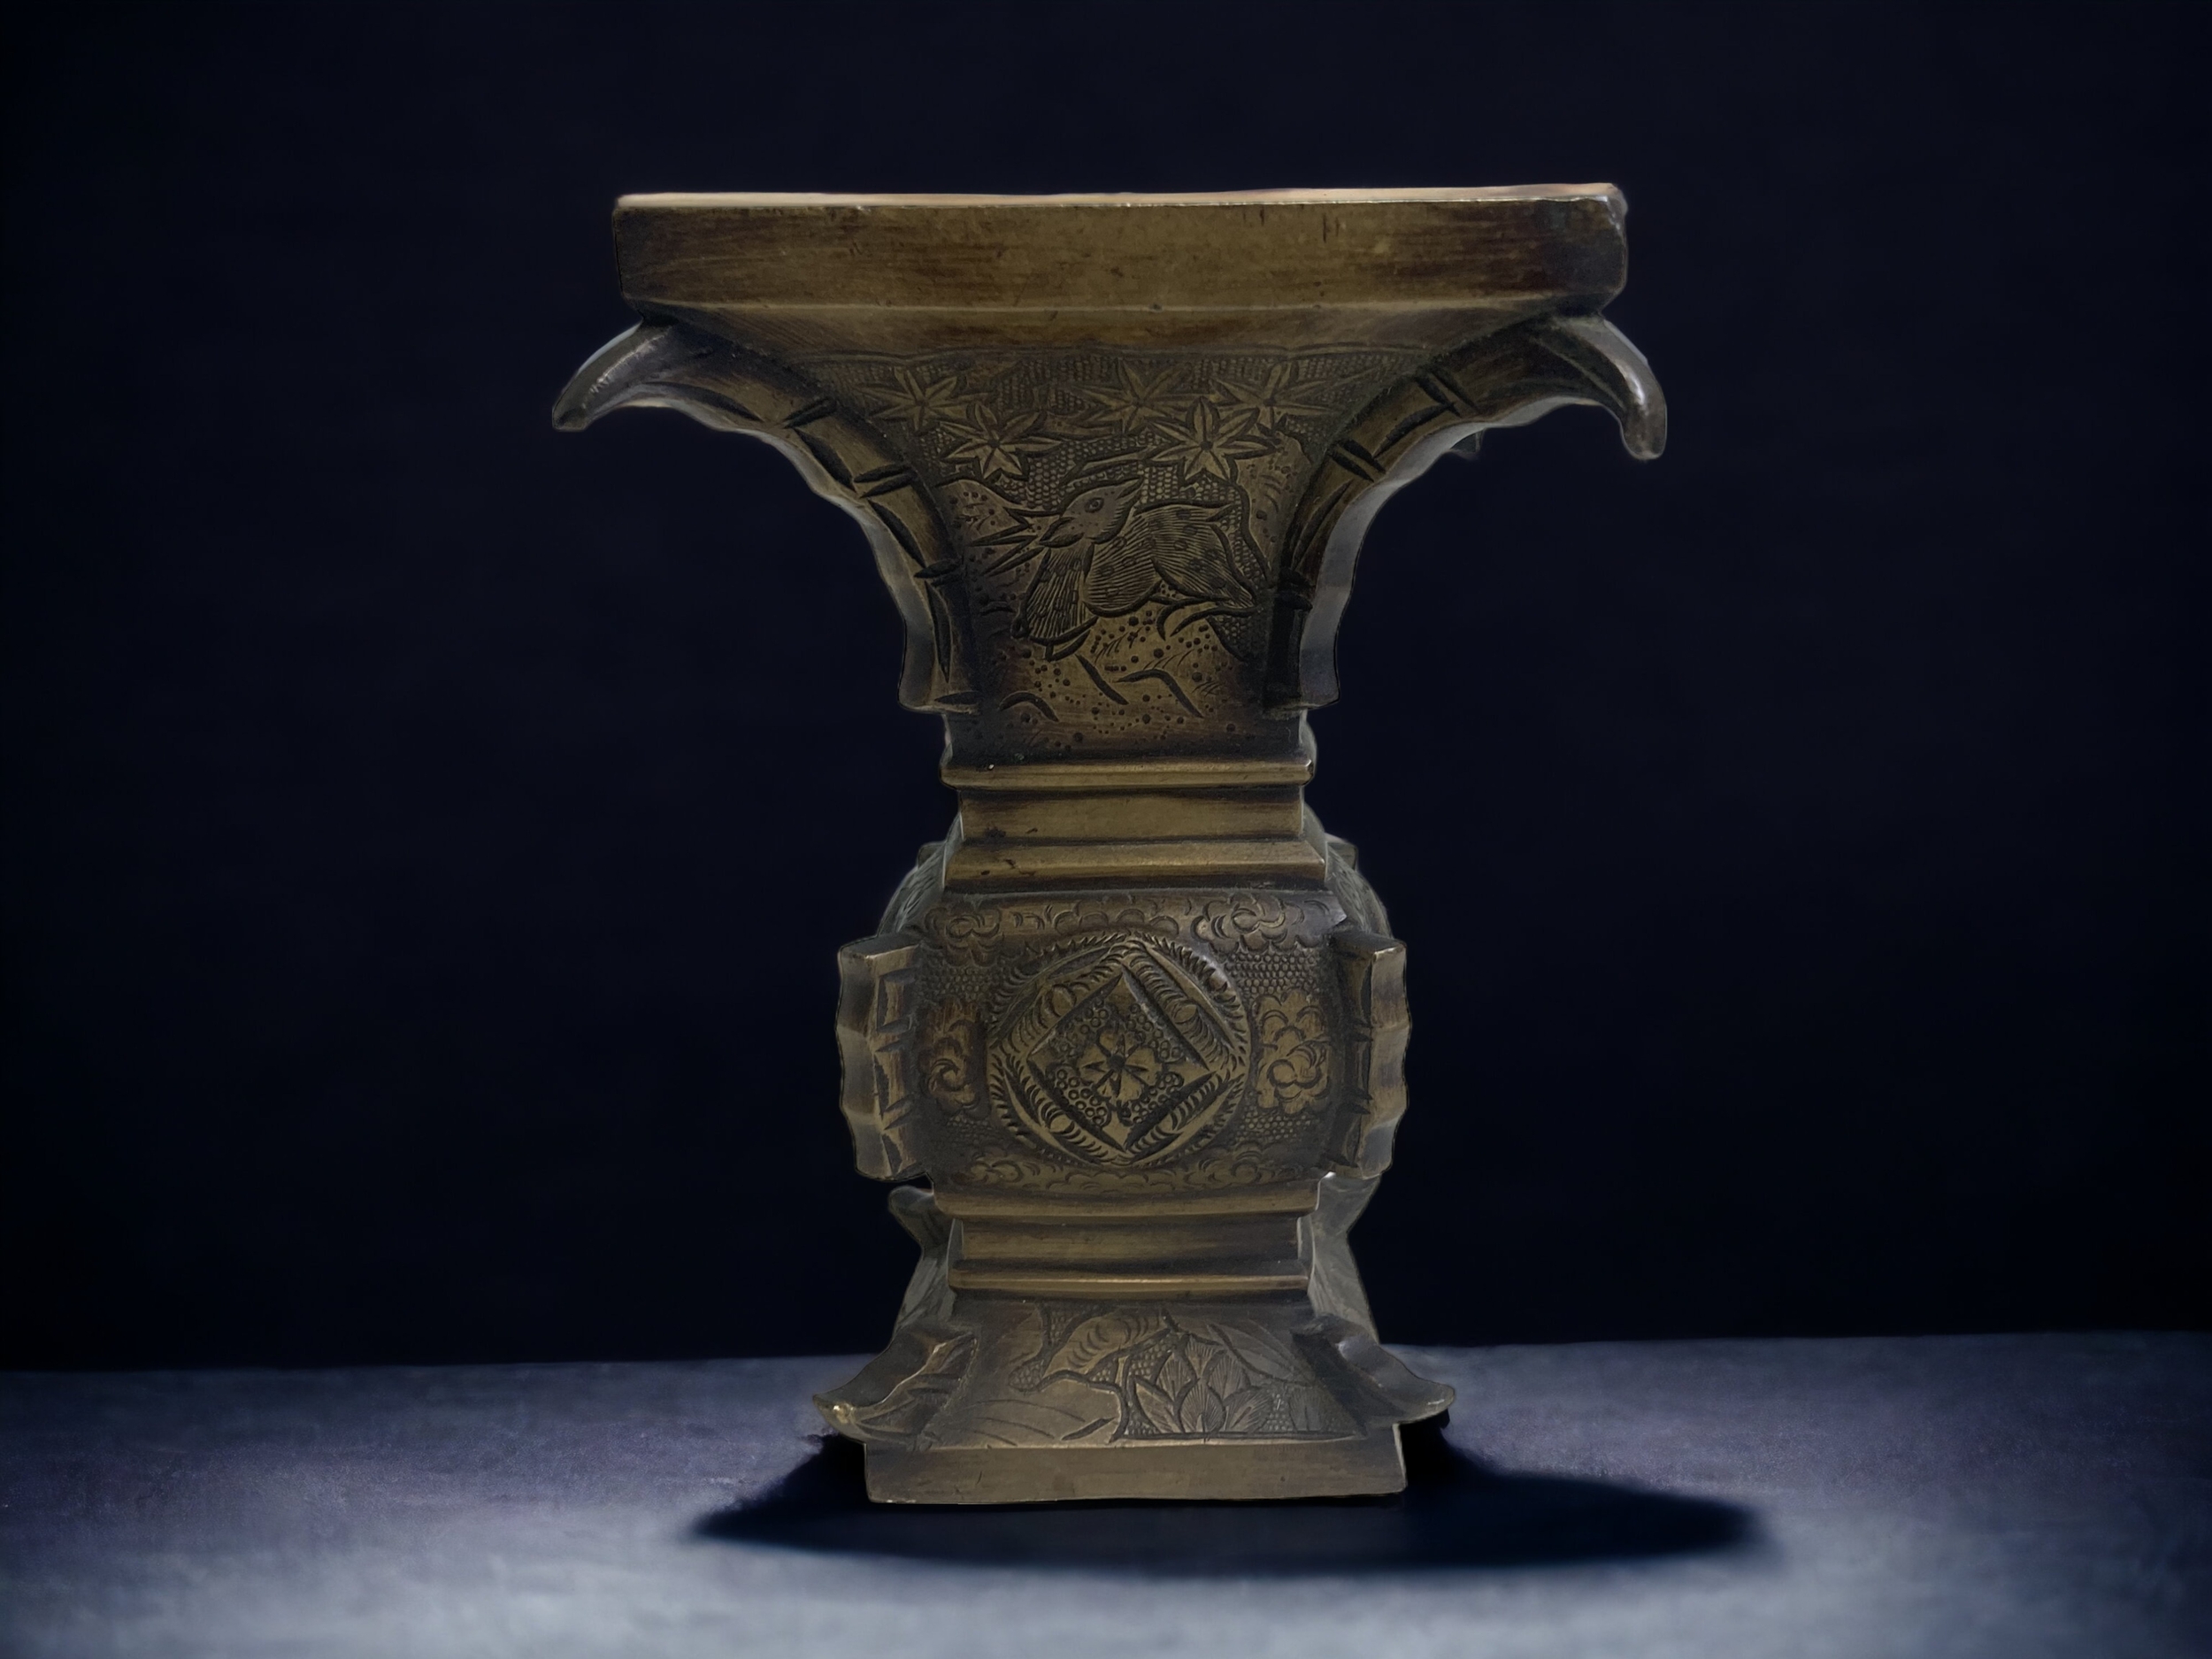 A CHINESE BRONZE CENSER. QING DYNASTY. ARCHAISTIC FORM, ENGRAVED WITH DEET, BIRDS & FLOWERS.